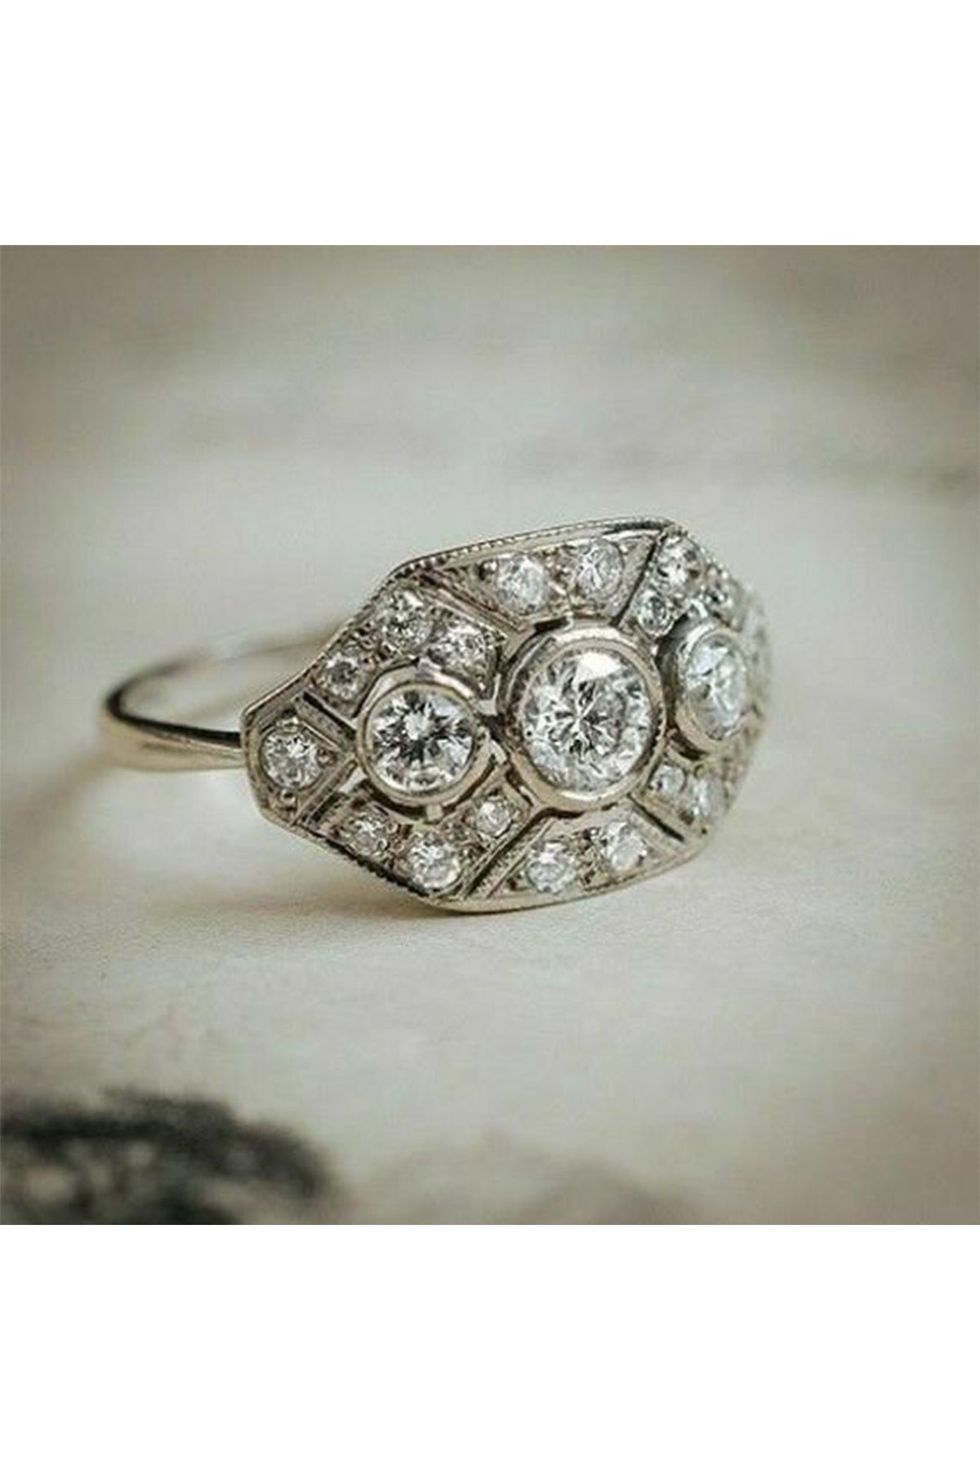 17 Timeless Art Deco Engagement Rings - Vintage Jewelry For Wedding,  Engagement